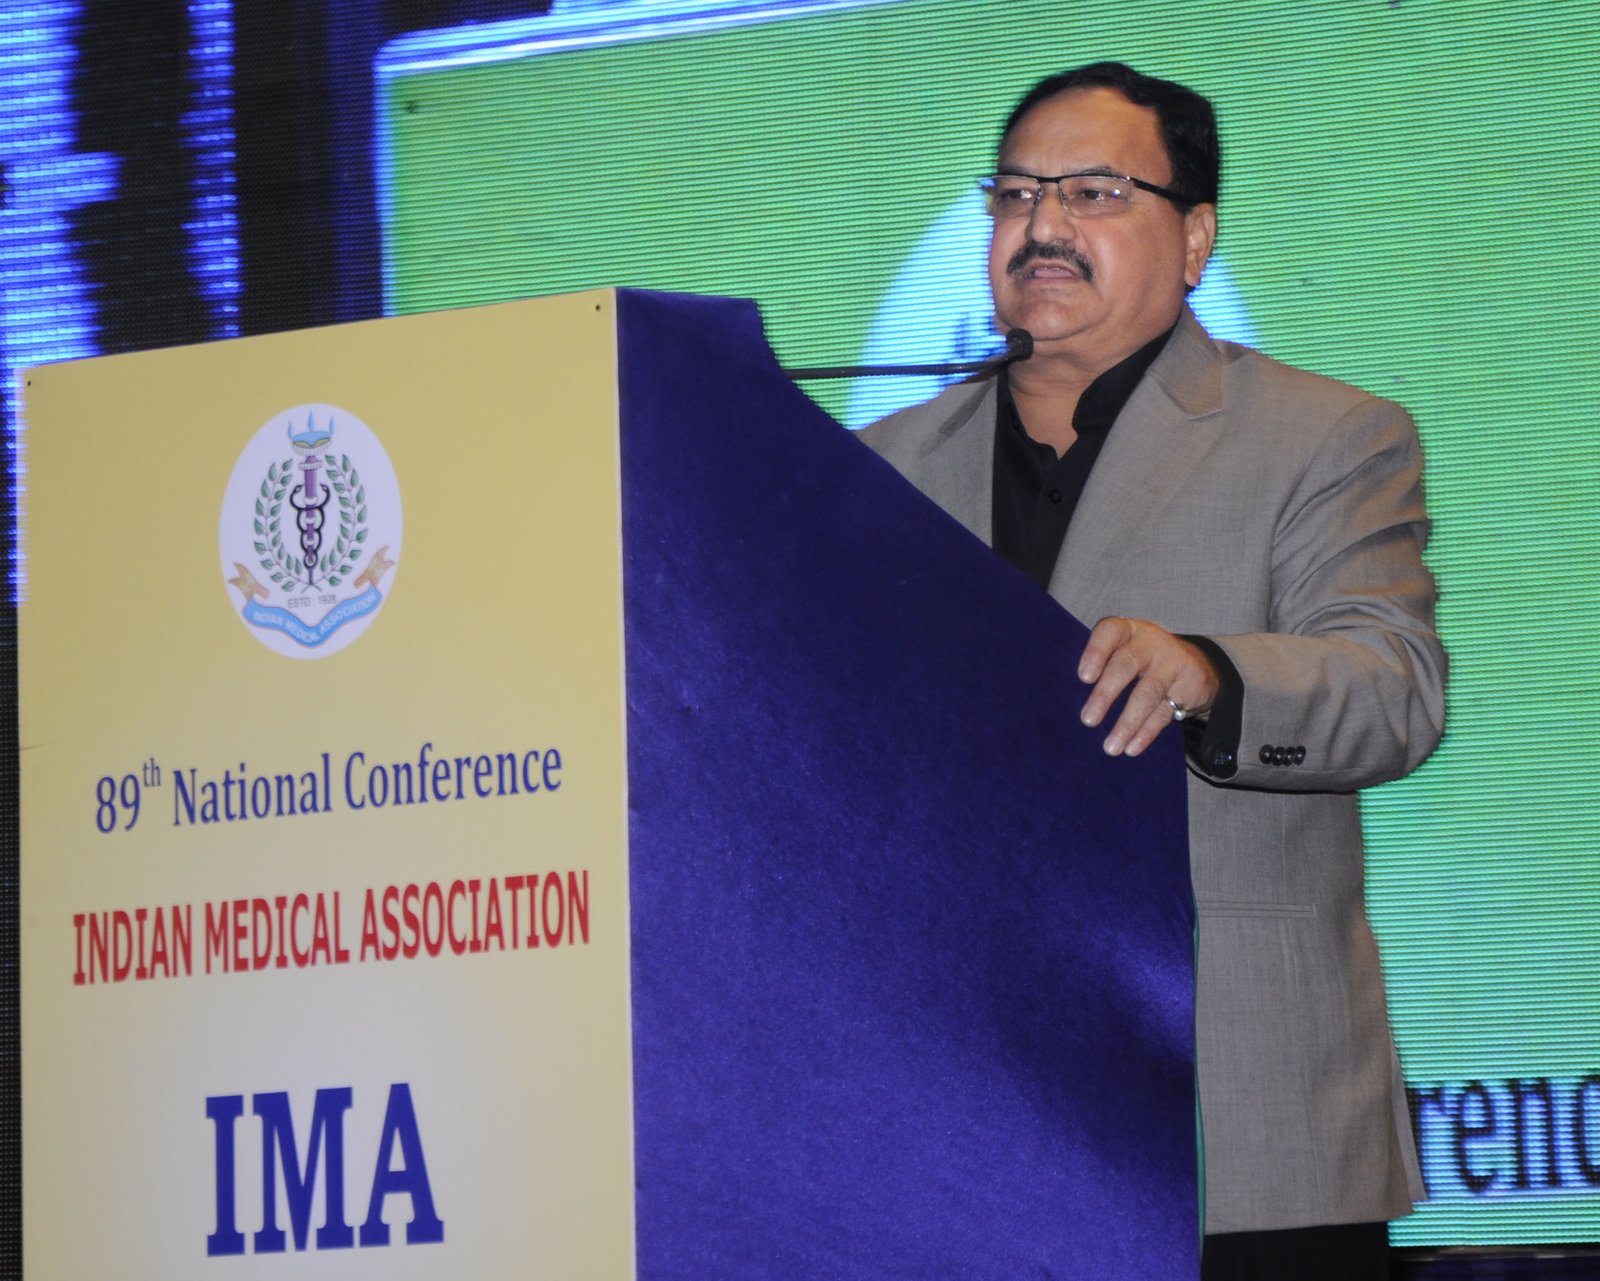 The health minister, Mr Jagat Prakash Nadda addressing the inaugural ceremony of the 89th National Conference â€œIMA NATCON 2014â€?, organised by the Indian Medical Association, at Ahmedabad on December 27, 2014